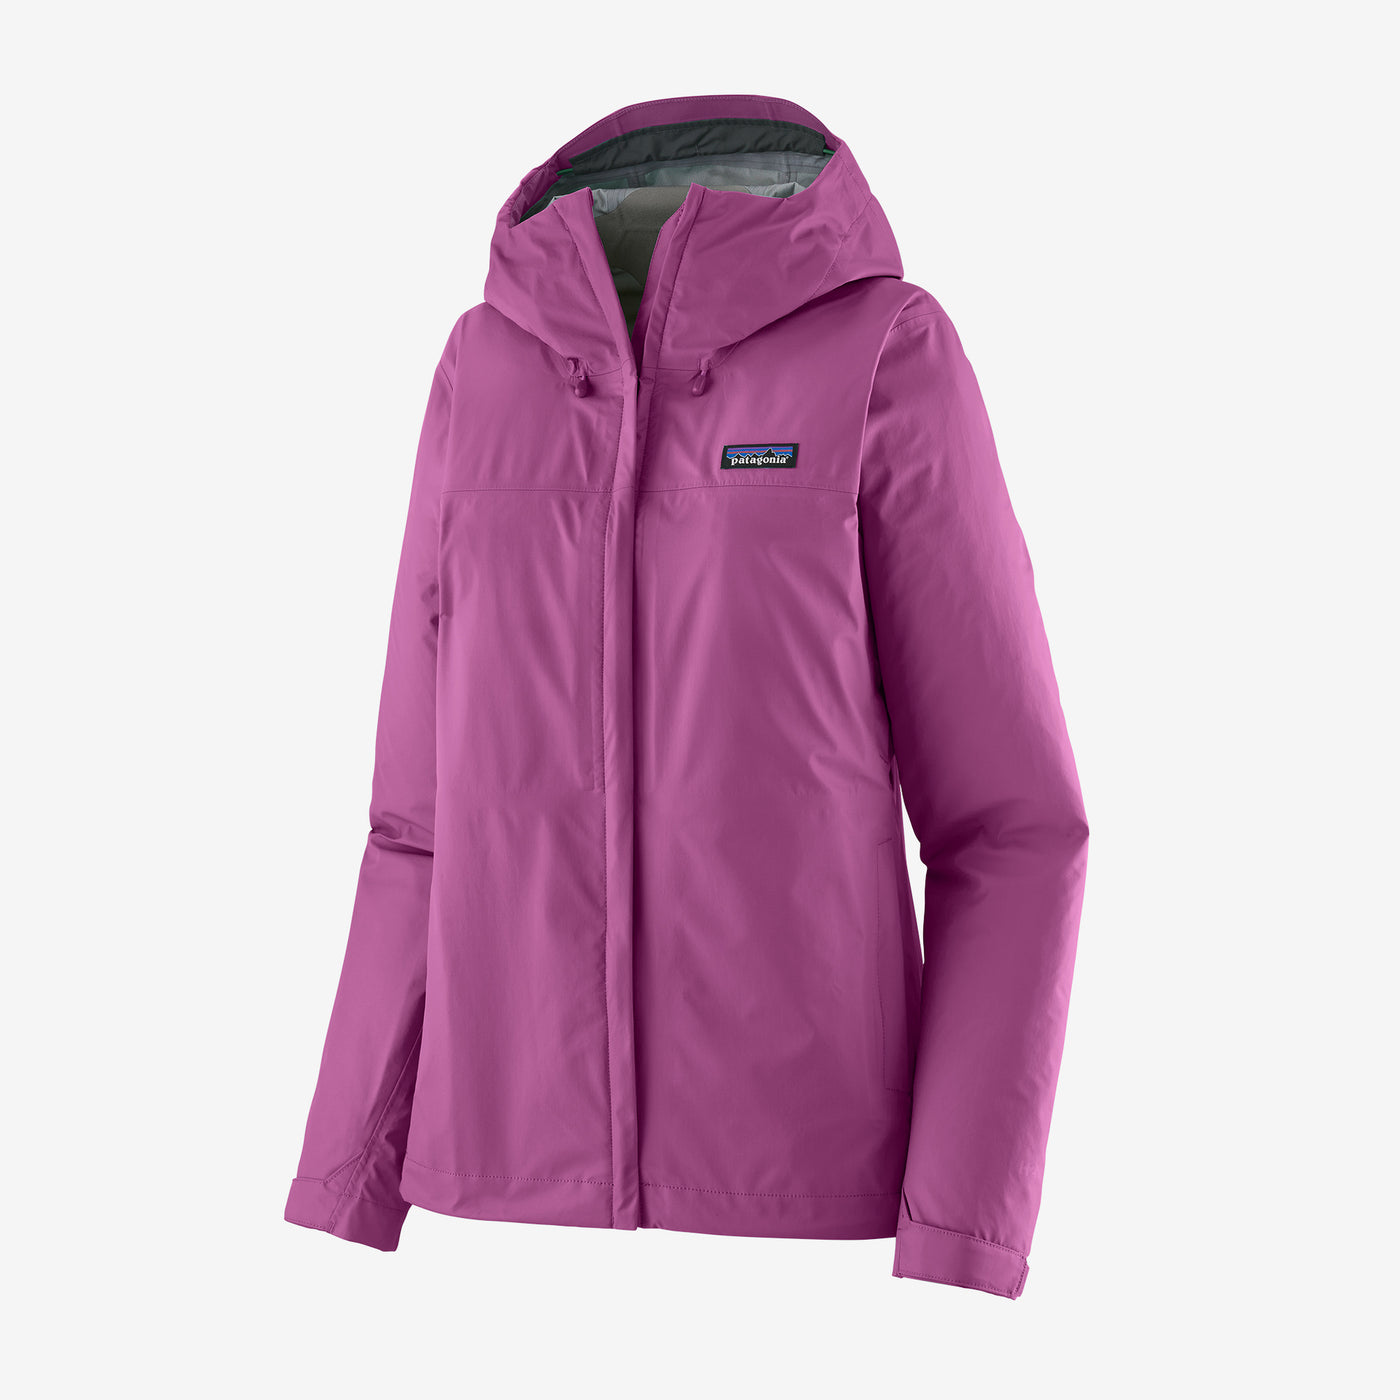 Patagonia Ladies Torrentshell 3L Jacket-Women's Clothing-Amaranth Pink-XS-Kevin's Fine Outdoor Gear & Apparel